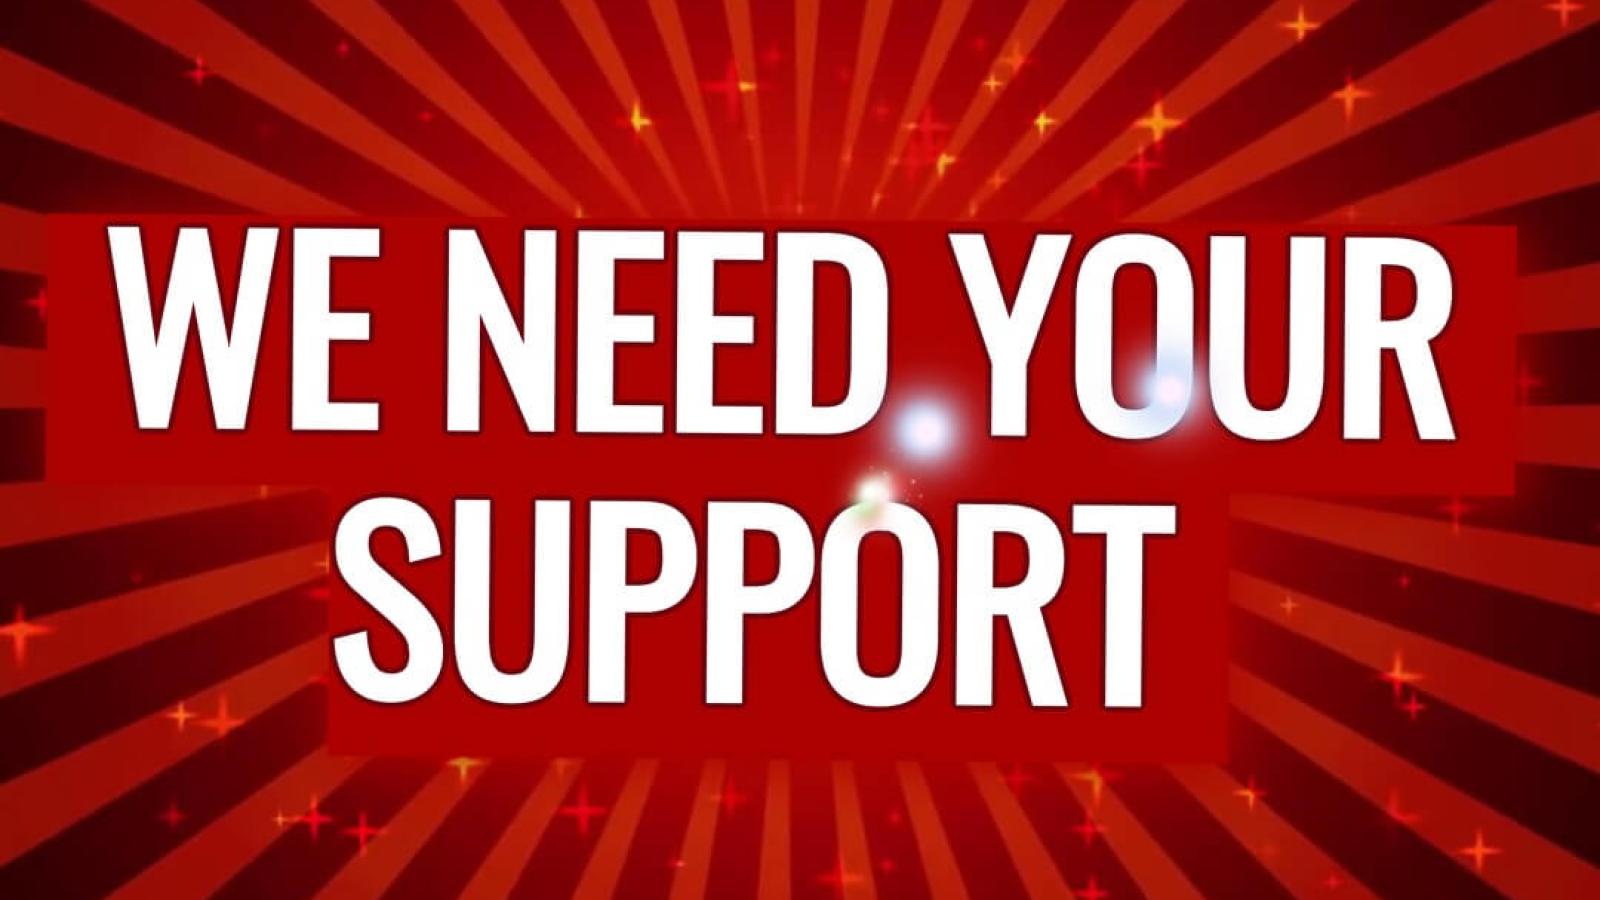 Graphic that says "We need your support"